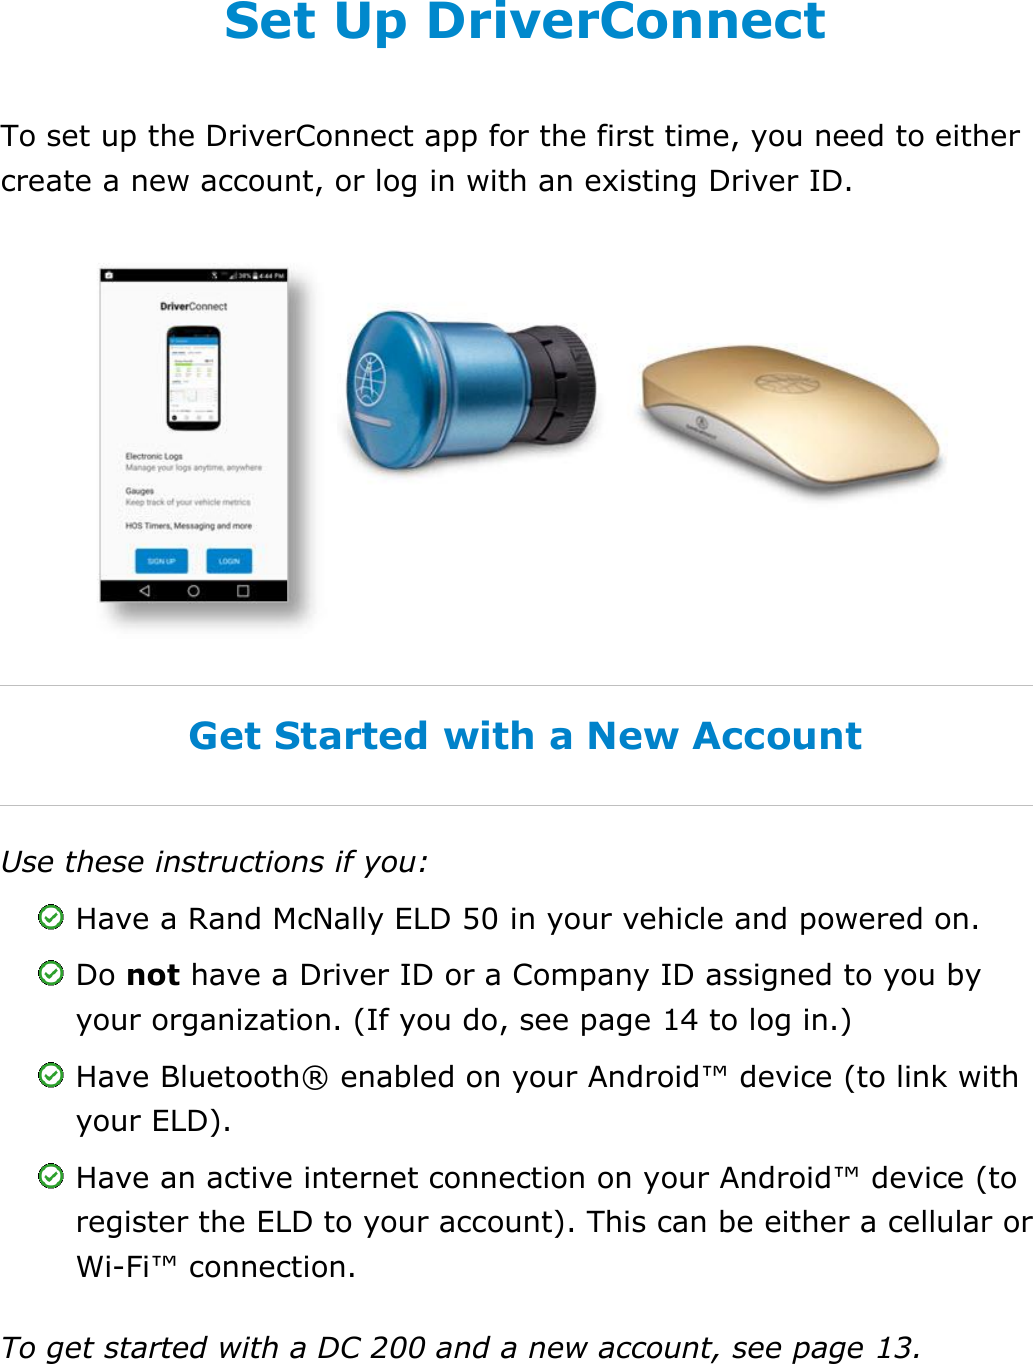 Set My Duty Status DriverConnect User Guide  7 © 2016-2017, Rand McNally, Inc. Set Up DriverConnect To set up the DriverConnect app for the first time, you need to either create a new account, or log in with an existing Driver ID.  Get Started with a New Account Use these instructions if you:  Have a Rand McNally ELD 50 in your vehicle and powered on.  Do not have a Driver ID or a Company ID assigned to you by your organization. (If you do, see page 14 to log in.)  Have Bluetooth® enabled on your Android™ device (to link with your ELD).  Have an active internet connection on your Android™ device (to register the ELD to your account). This can be either a cellular or Wi-Fi™ connection. To get started with a DC 200 and a new account, see page 13.   